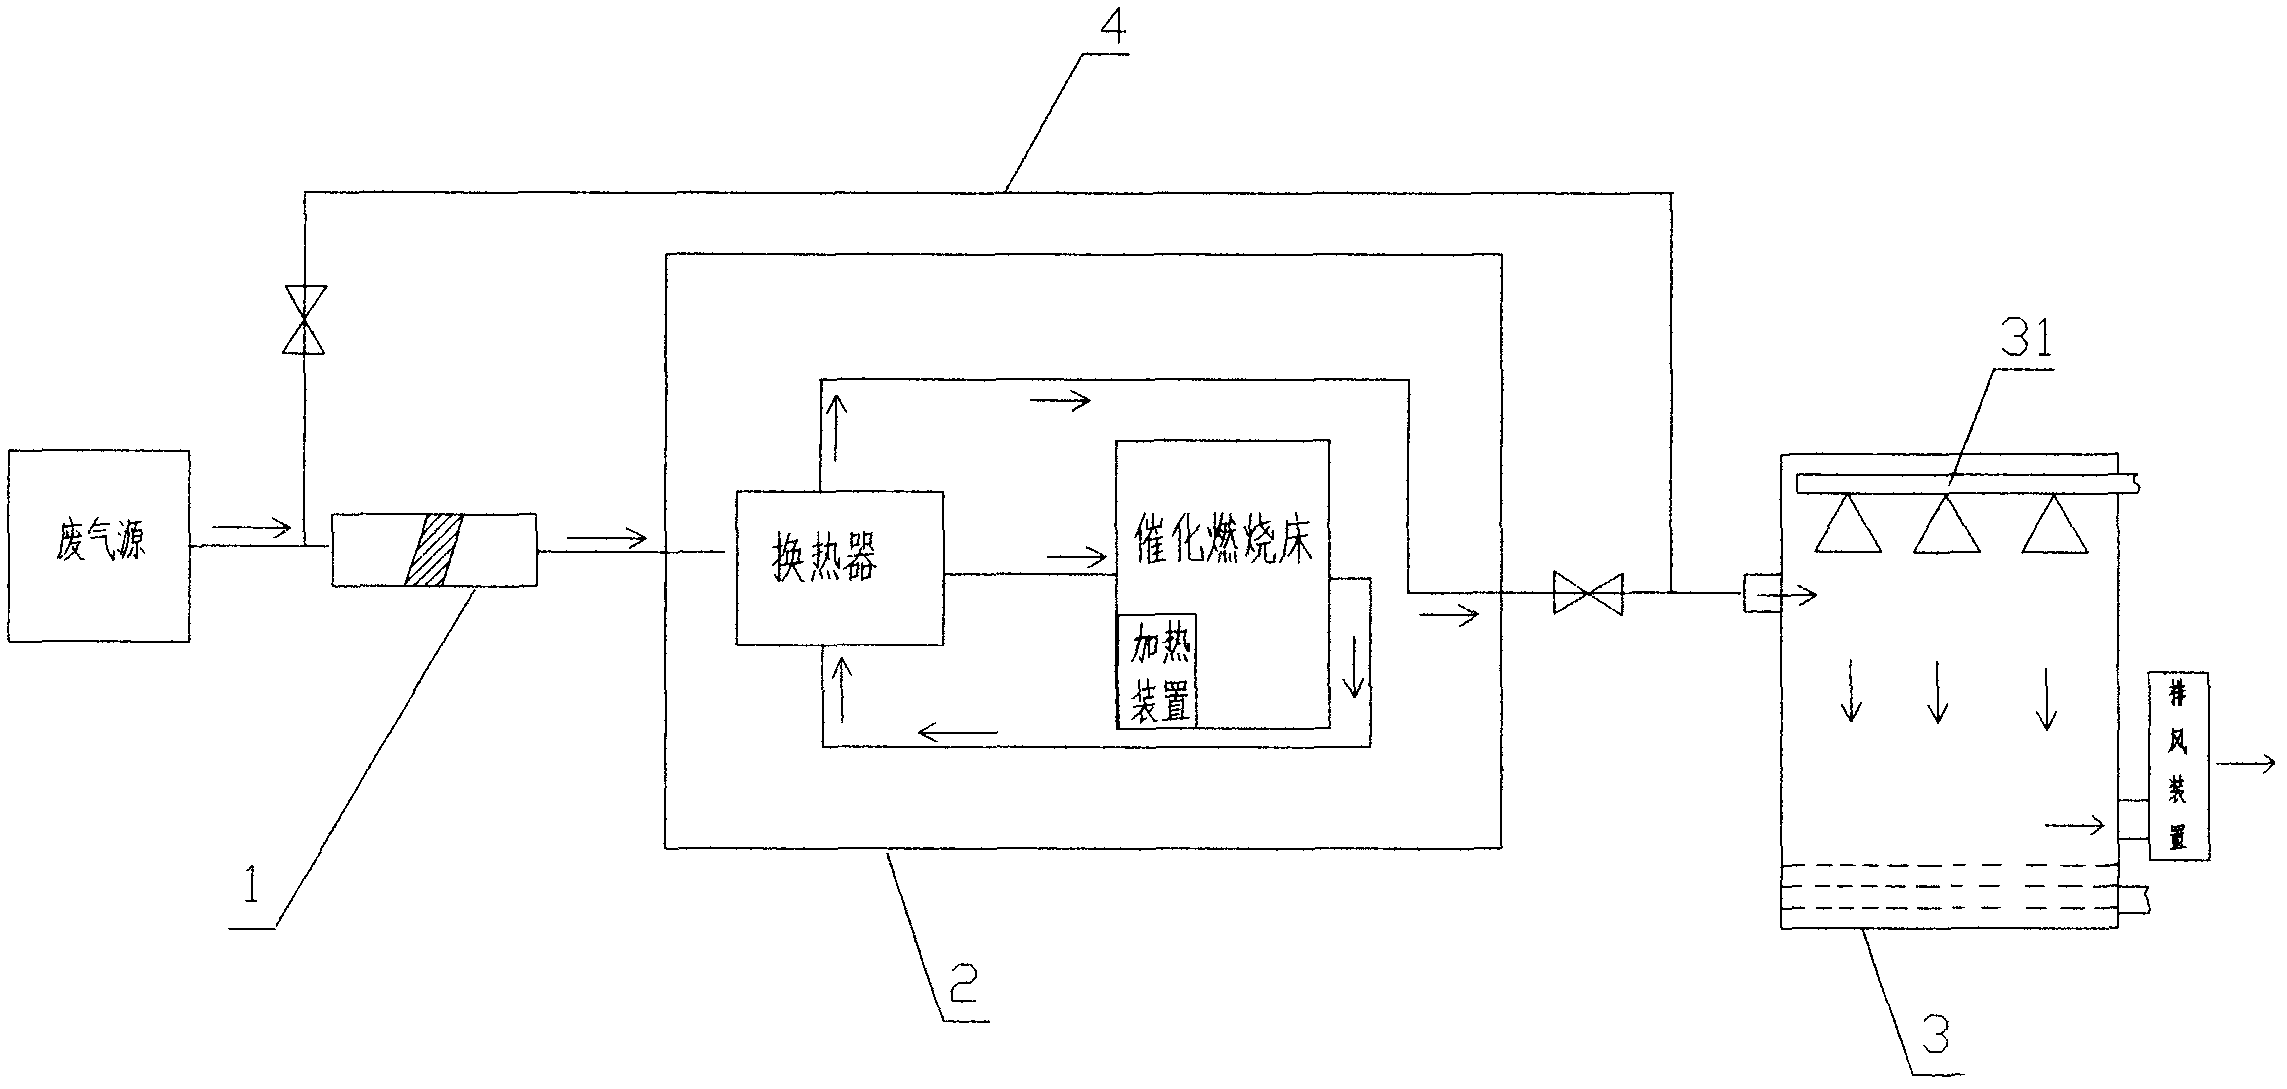 Waste gas catalytic combustion and biological purification device